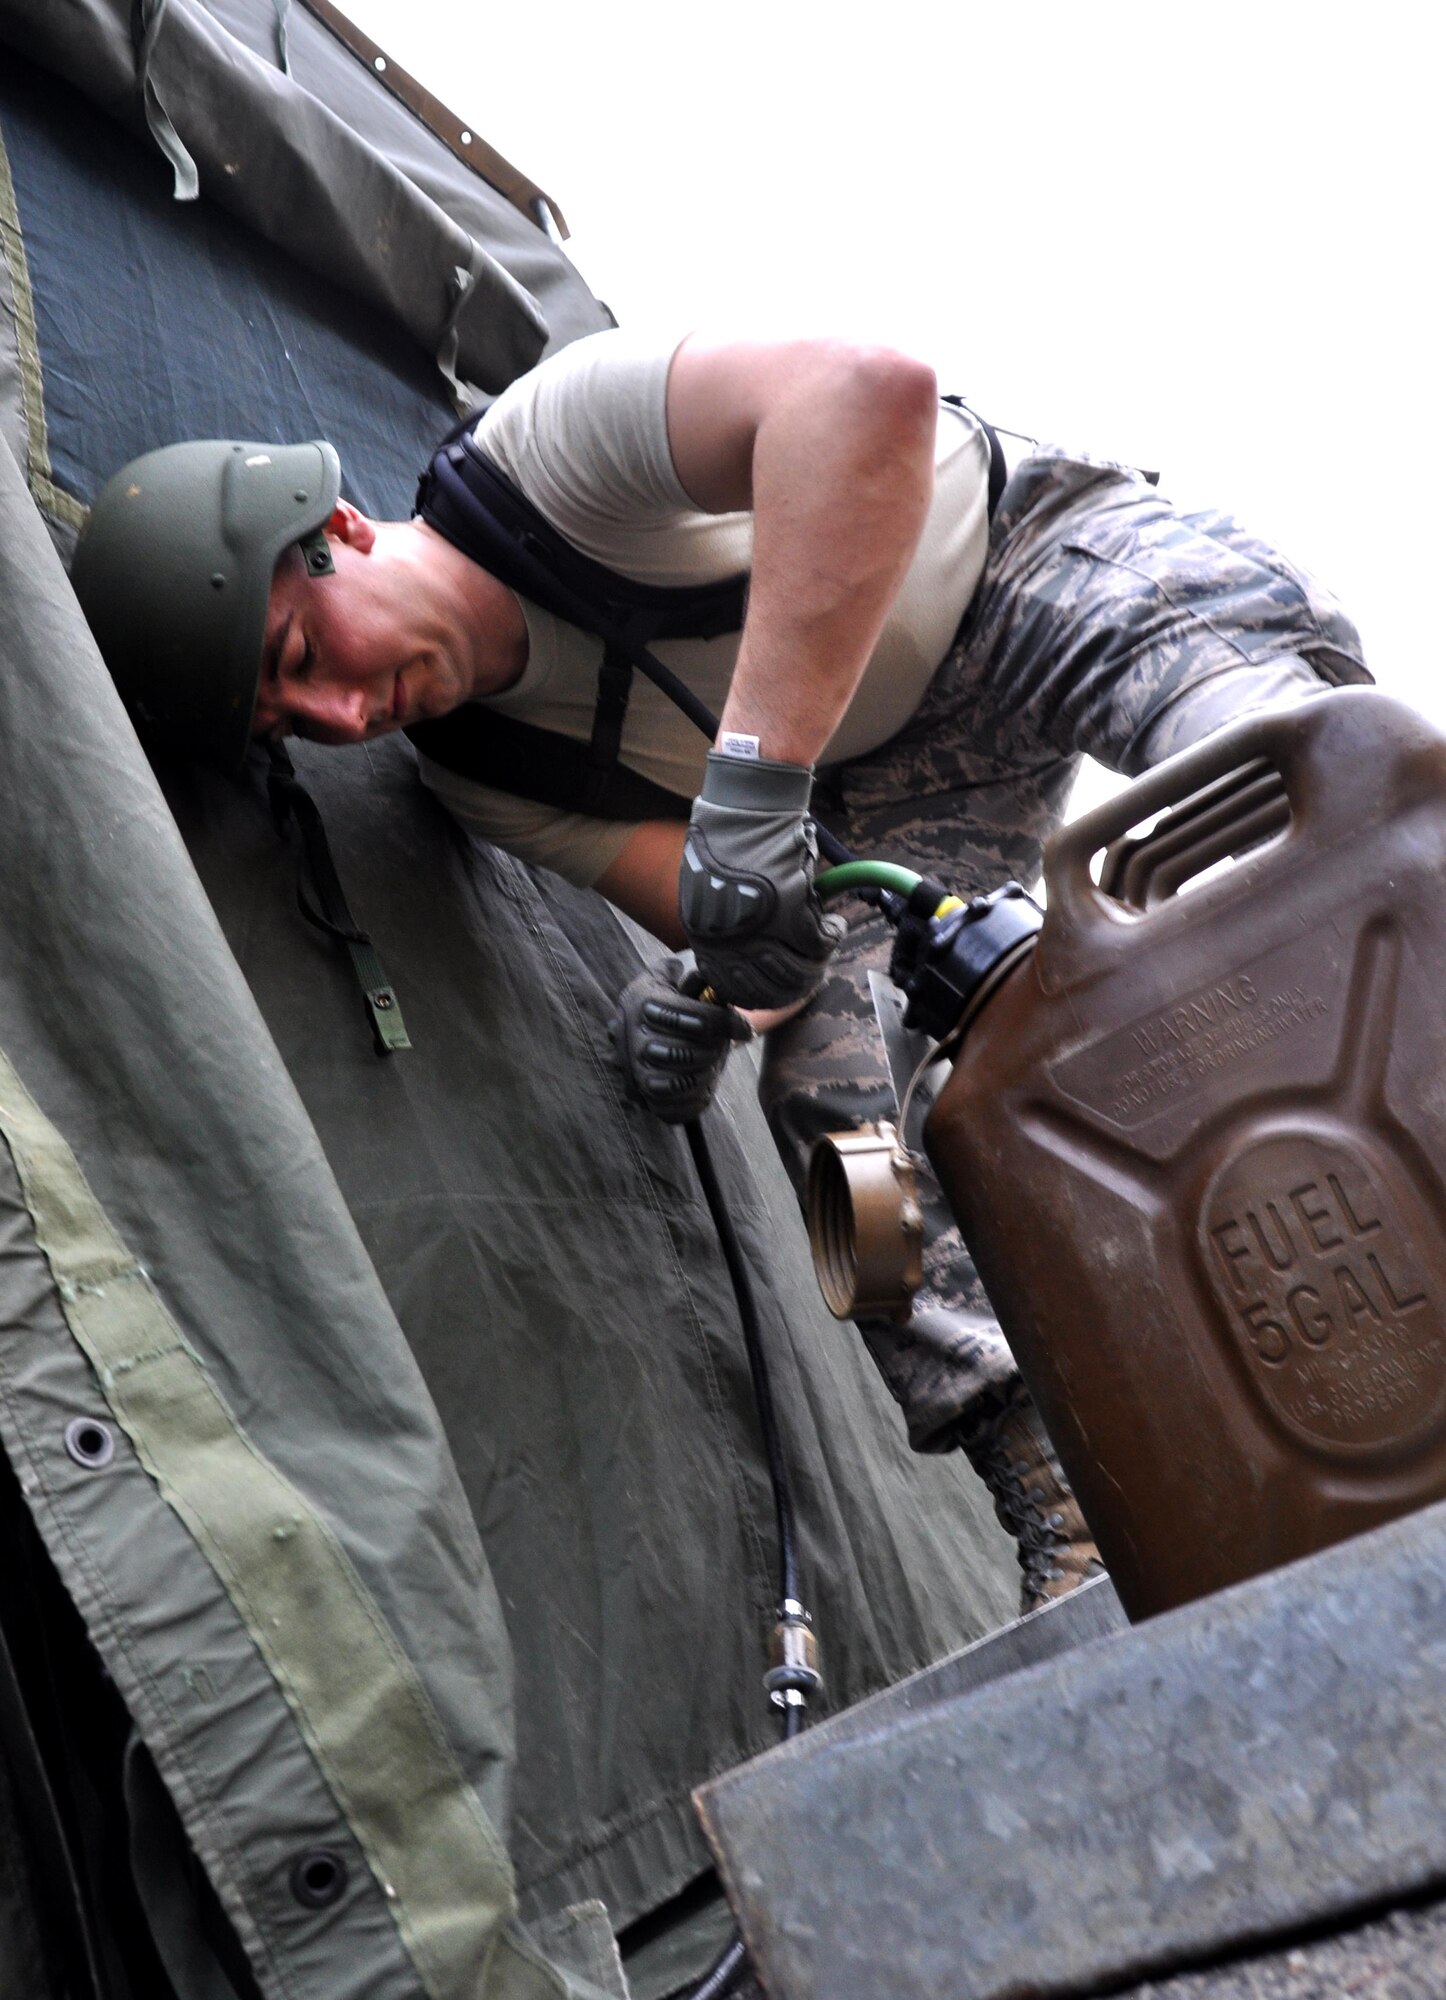 Staff Sgt. Daniel Chrest, 911th Force Support Squadron, Pittsburgh, Pa., connects fuel line to a tank for the field kitchen during the Readiness Challenge for Force Support Silver Flag at Dobbins Air Reserve Base, Georgia, March 12, 2015. The challenge consisted of teams competing against each other in nine different events ranging from following a convoy, building tents, fixing Babington burners, cooking meals, planning lodging, planning a base from scratch, driving a forklift and a scavenger hunt. (U.S. Air Force photo/Senior Airman Daniel Phelps)